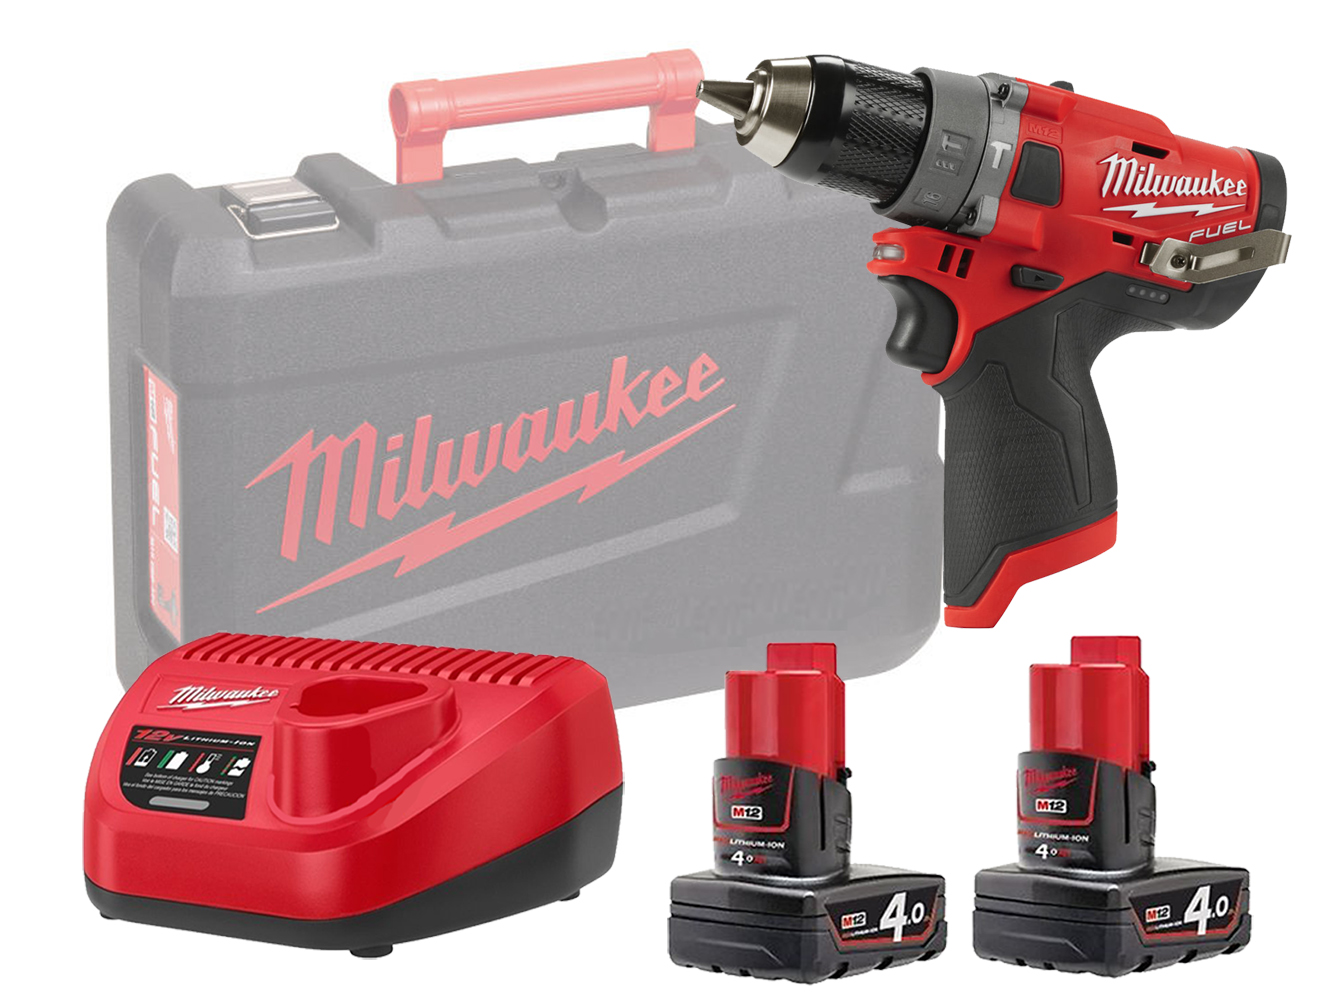 Milwaukee M12FPD 12V Fuel Sub Compact Percussion Drill (Combi Drill) 2-Speed - 4.0Ah Pack